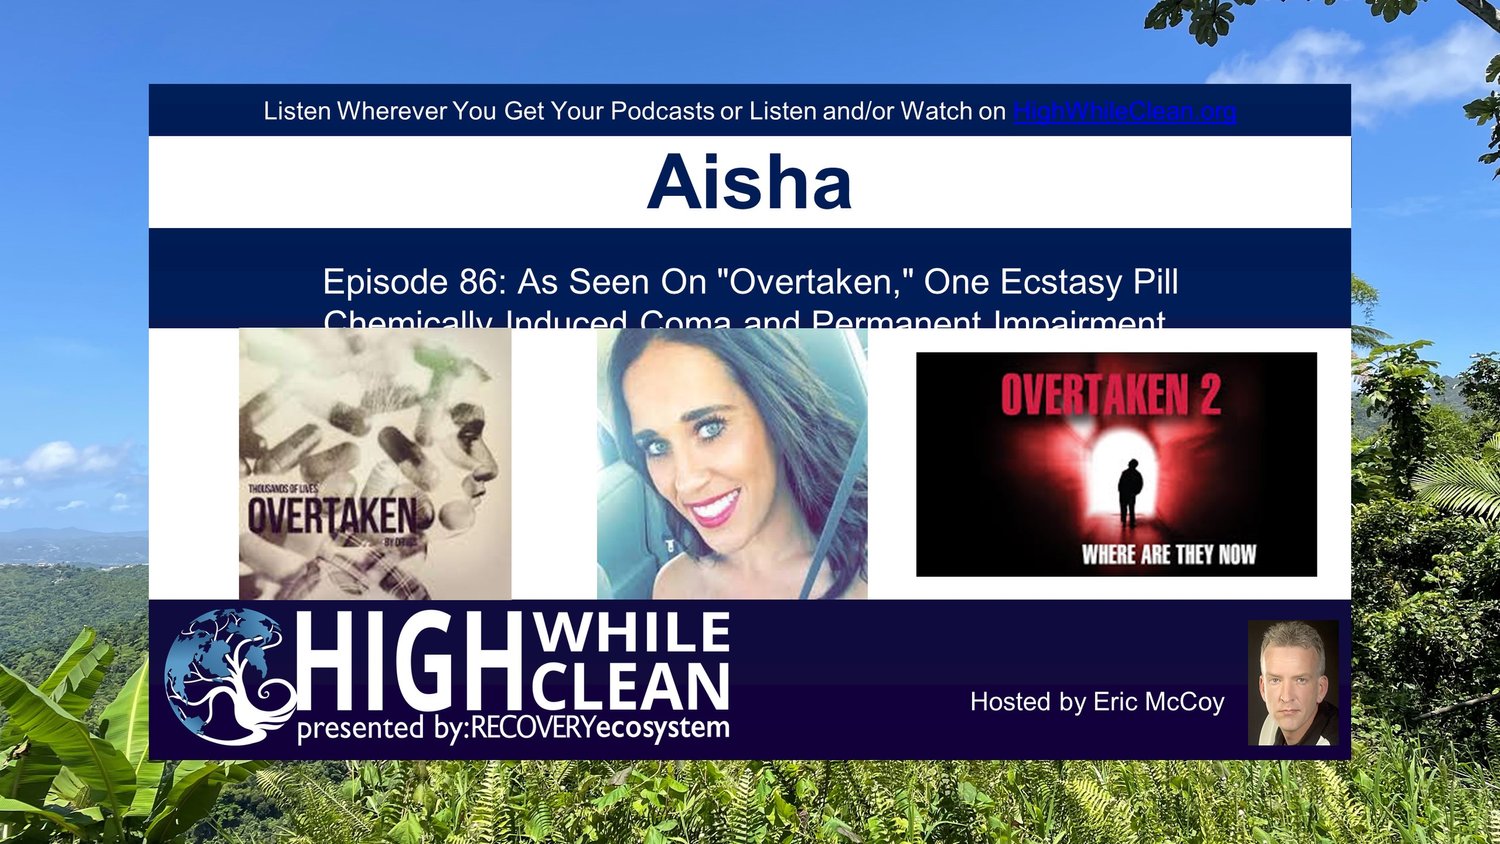 Episode 086: Aisha: Seen on "Overtaken." One Pill of Ecstasy: a Coma and Permanent Disabilities